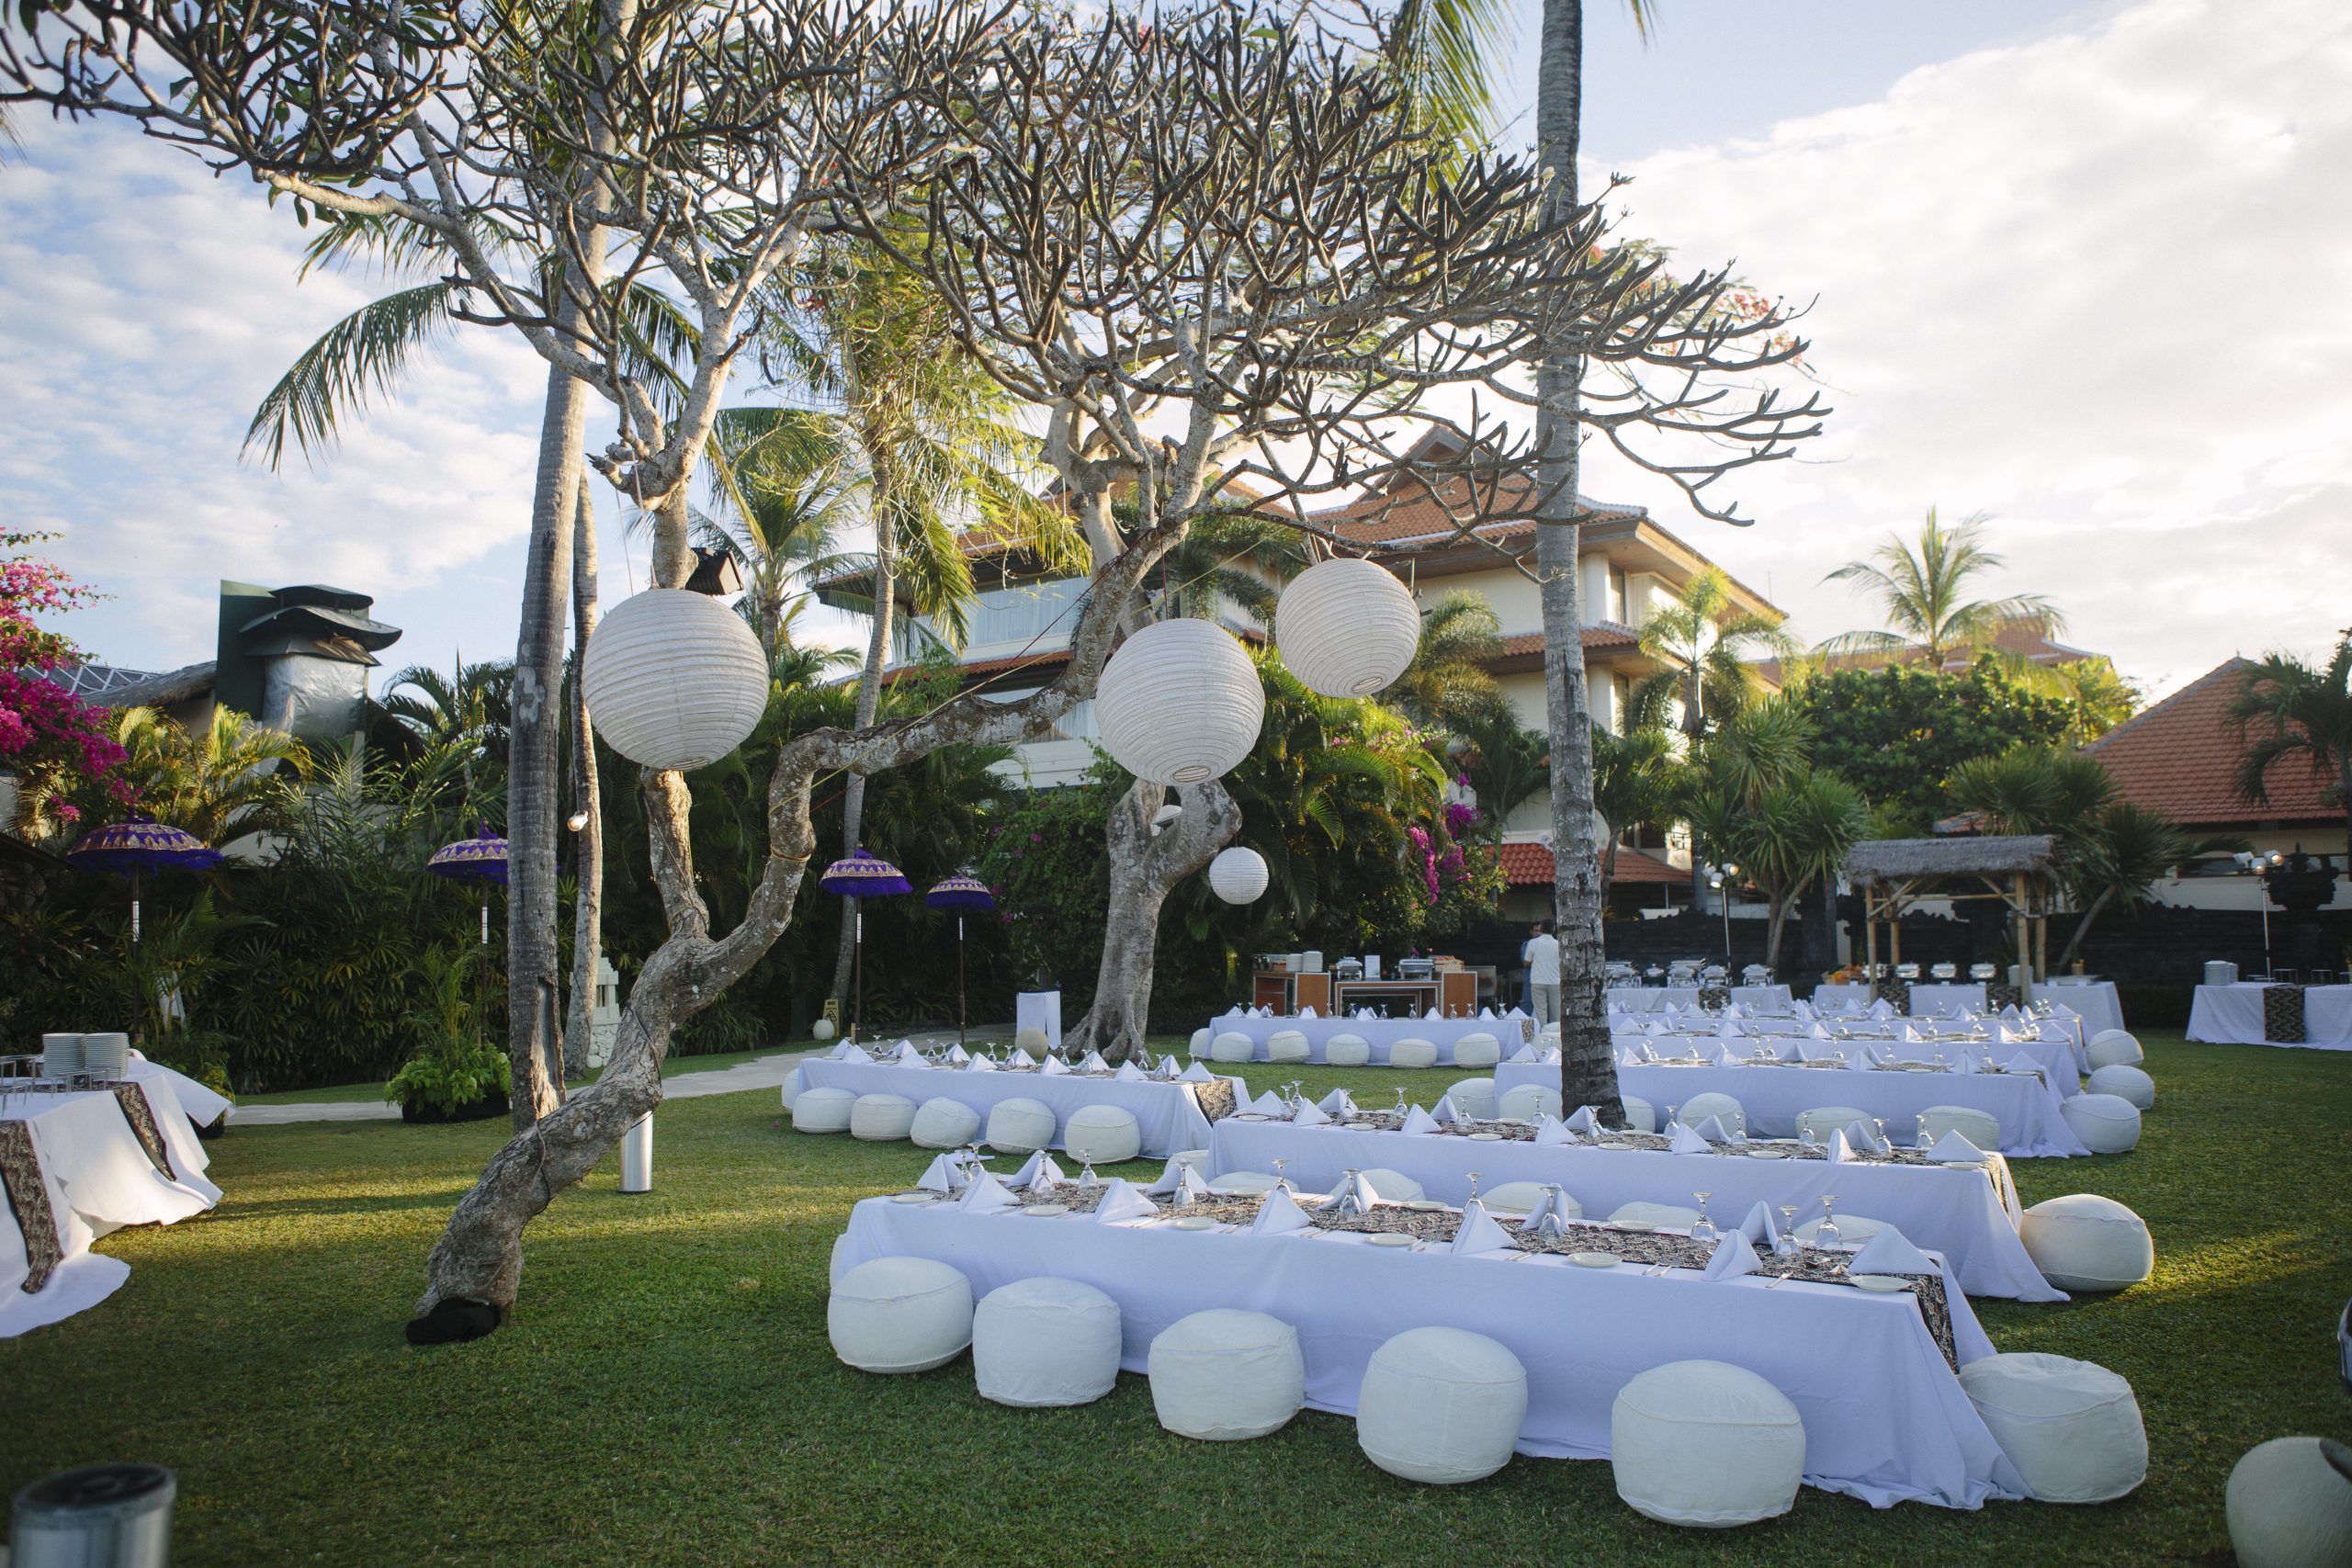 A themed outdoor dinner party decorated with white tables and seating.